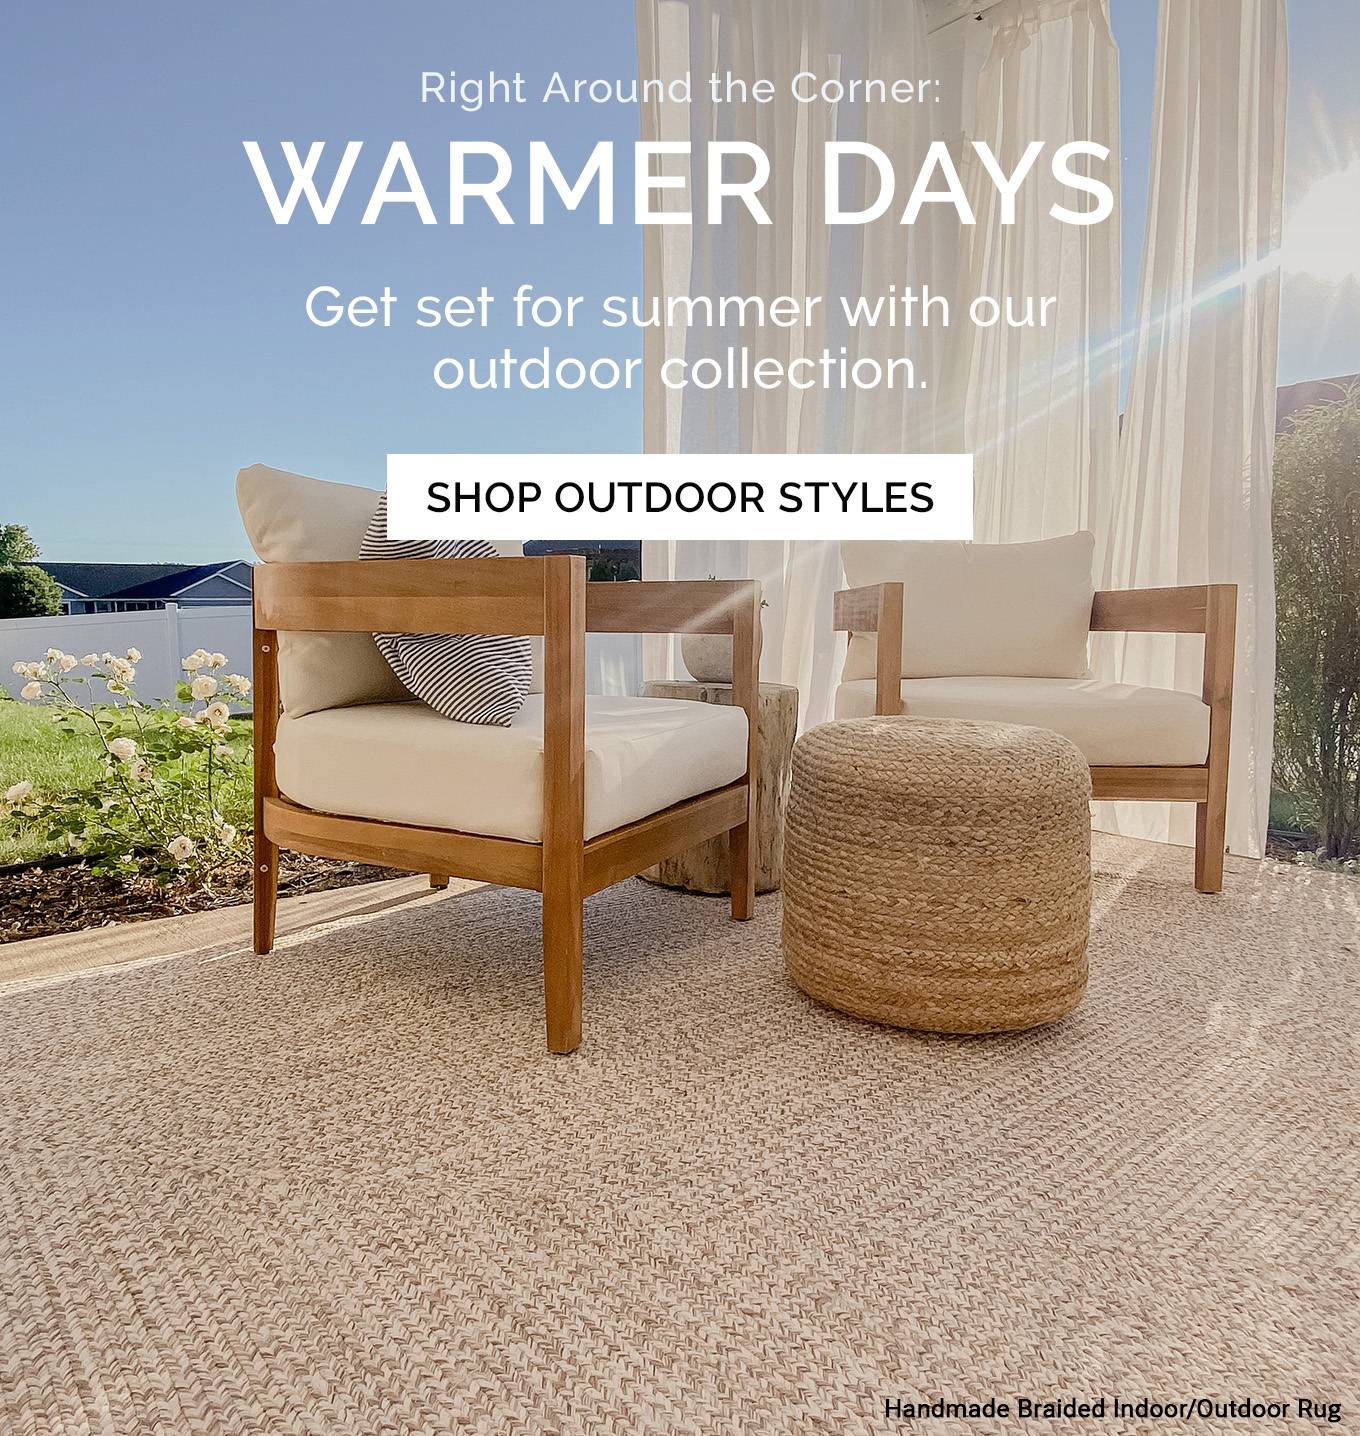 Right Around the Corner: Warmer Days | Get set for summer with our outdoor collection | Shop Outdoor Styles